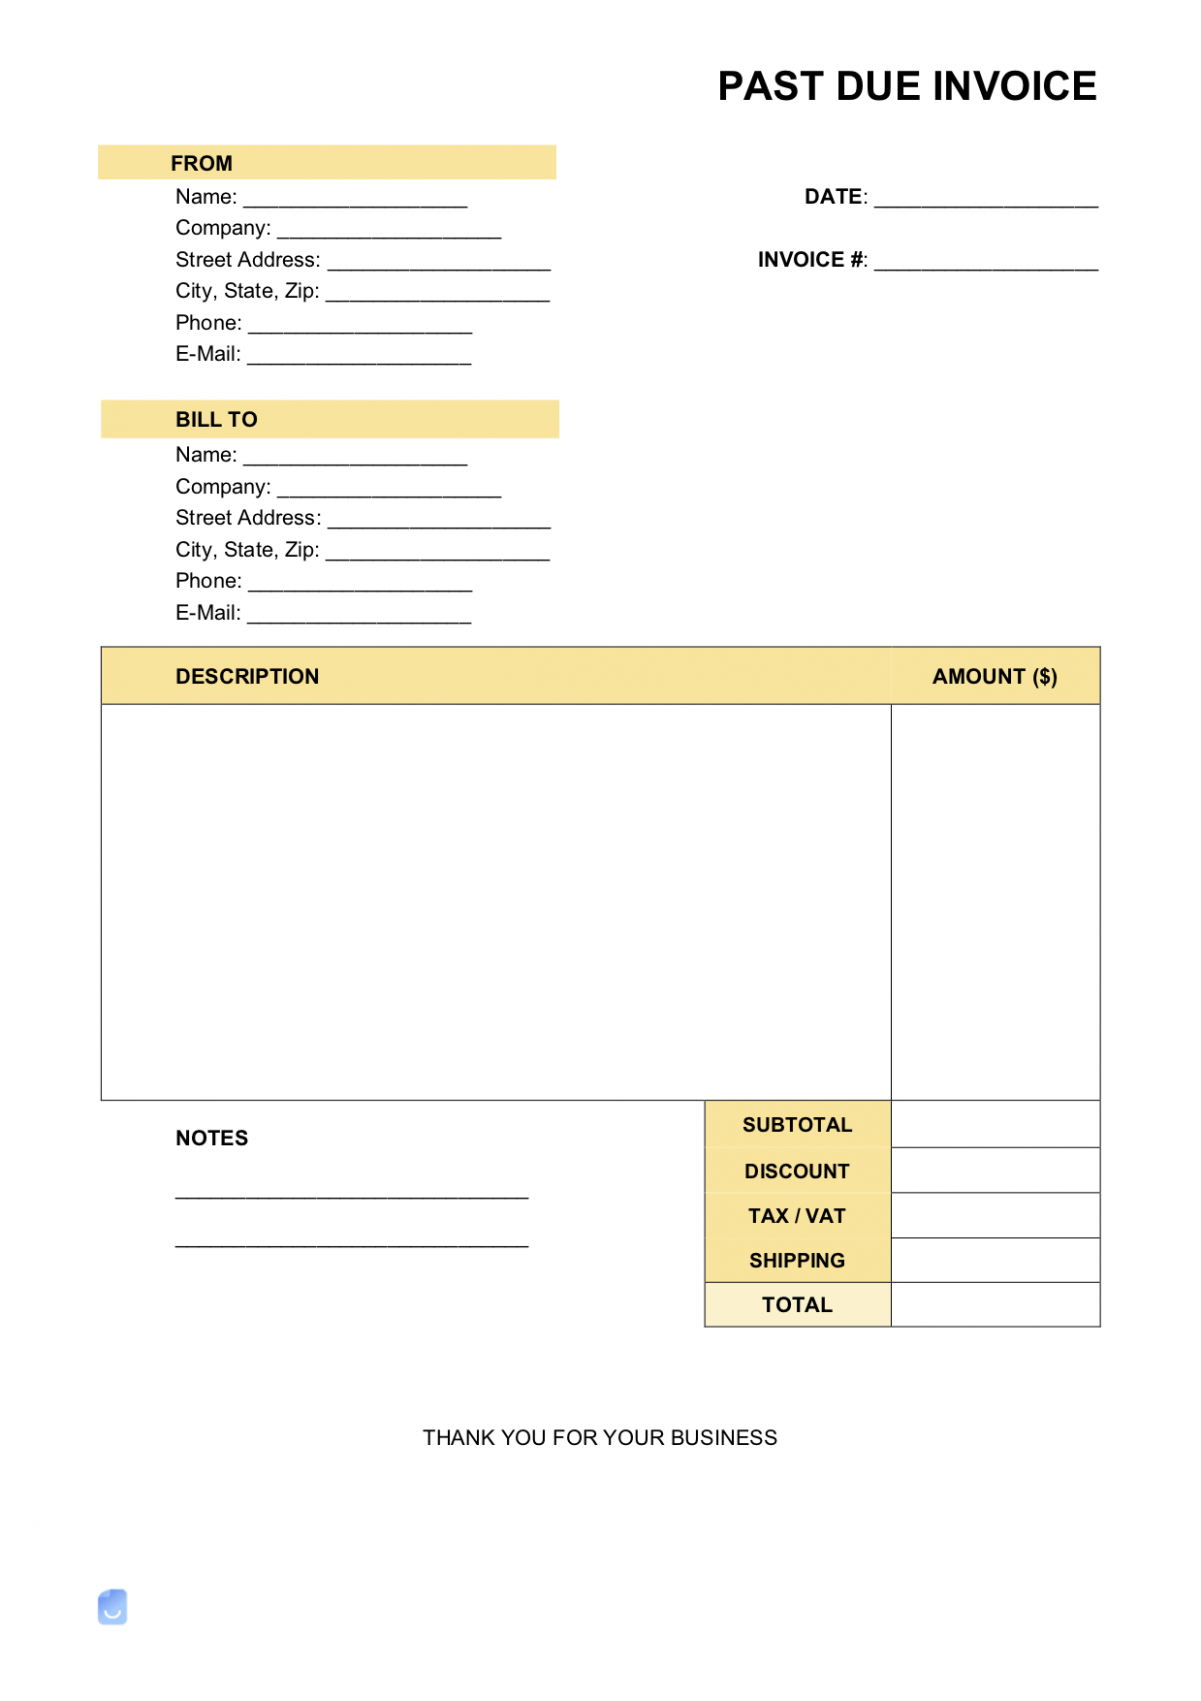 Sample Past Due Invoice Template Doc